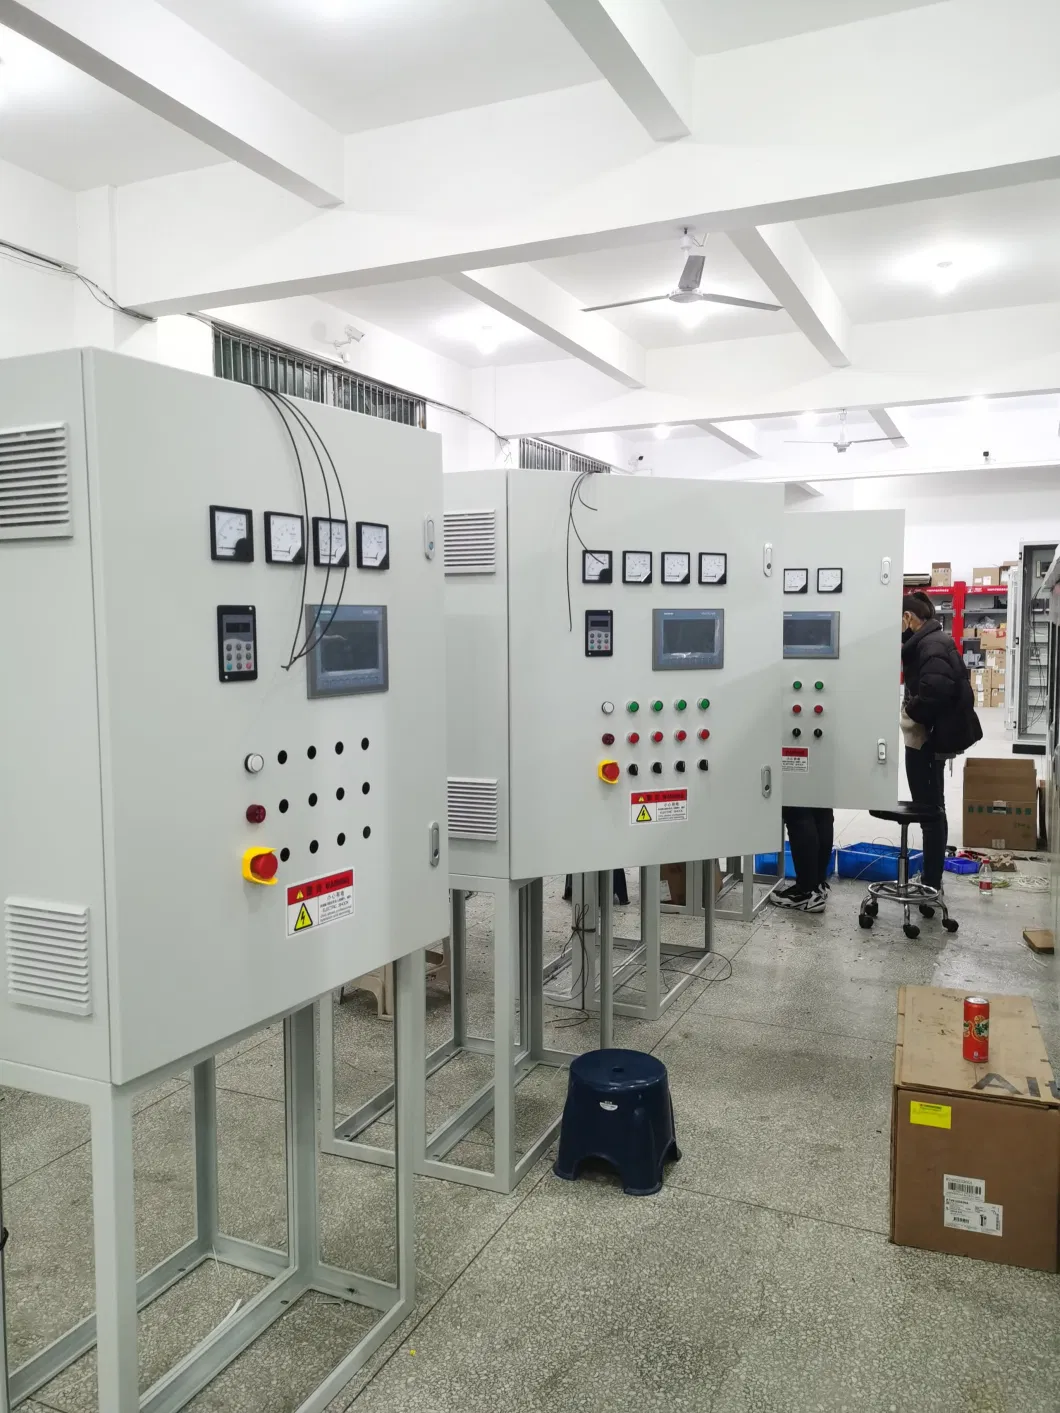 Q82 Electrical Equipment Panel Variable Frequency Energy-Saving VFD Control Cabinet